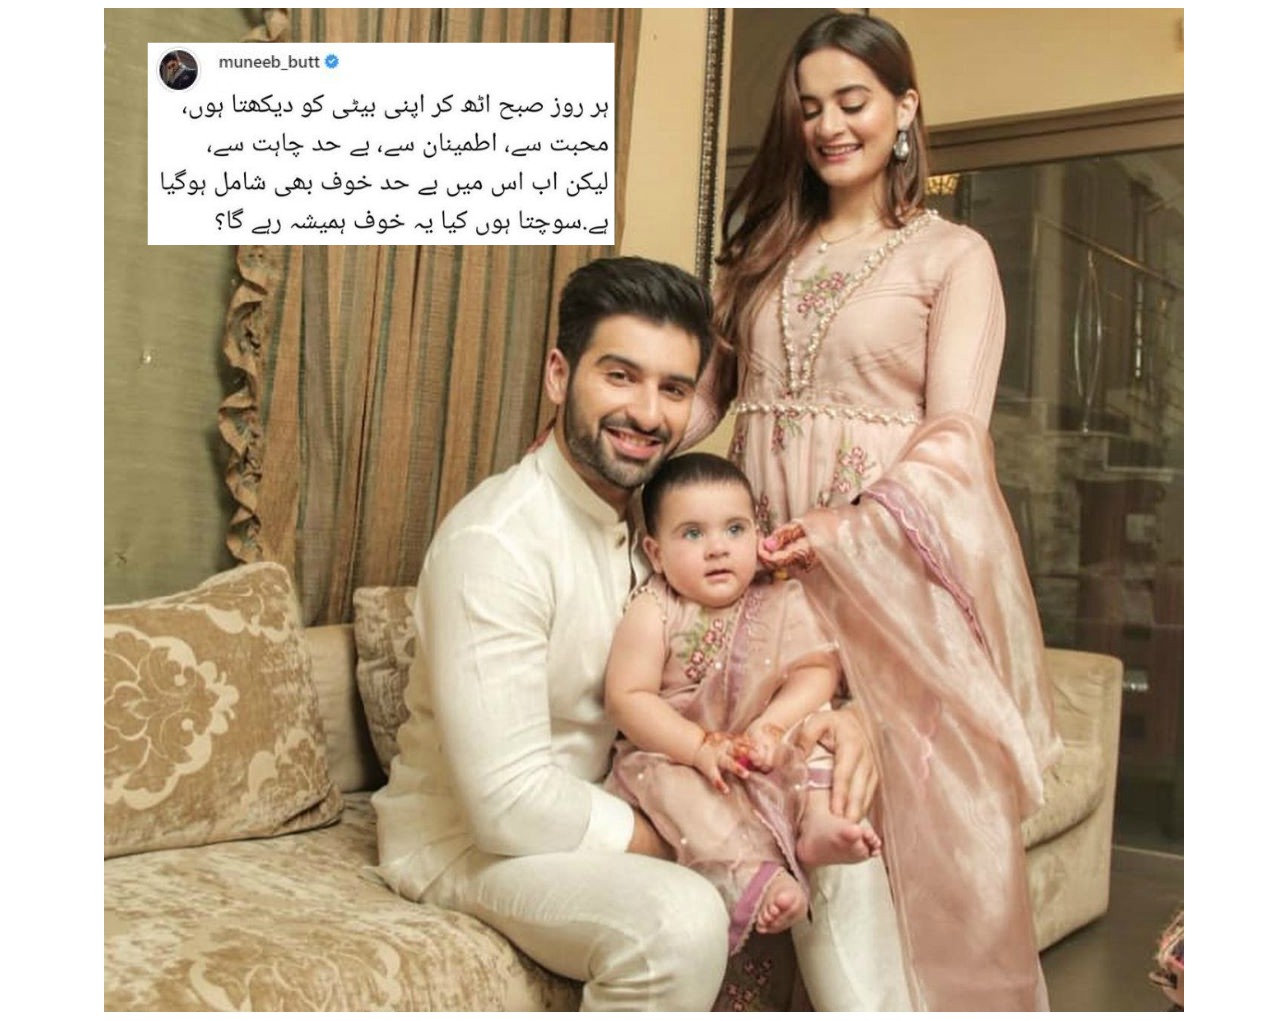 muneeb butt expresses fear for his baby daughter